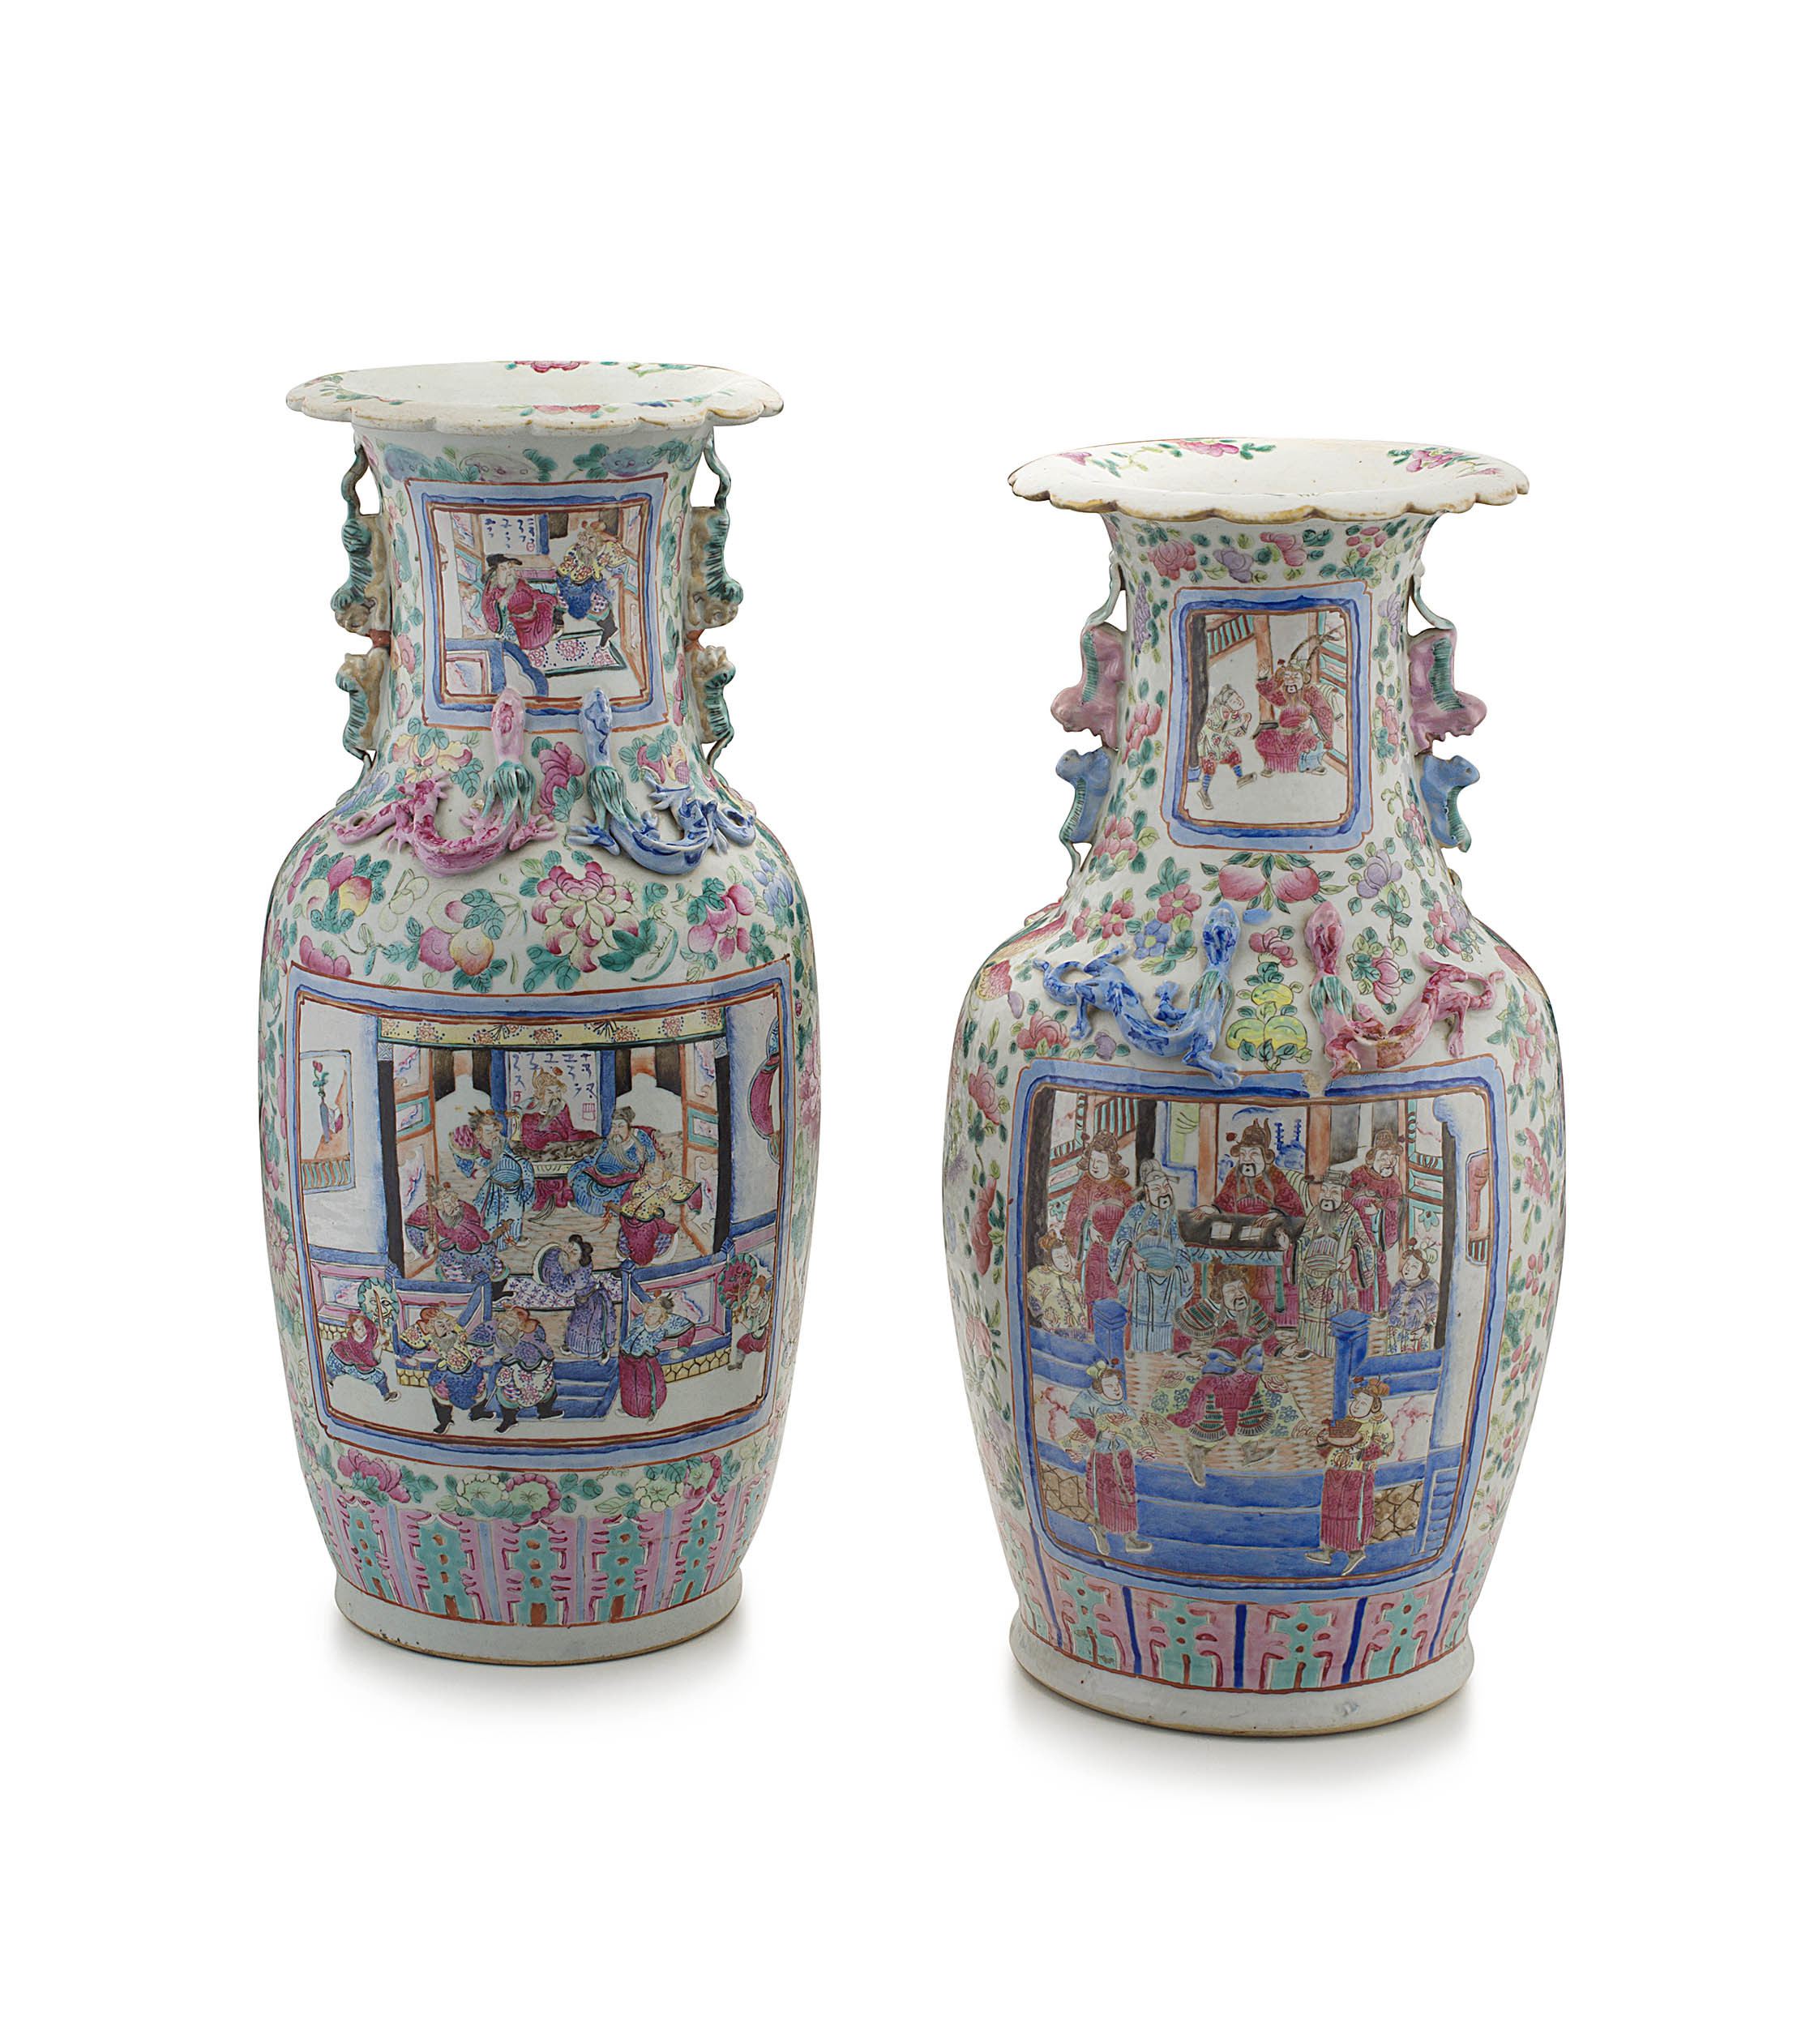 Two Chinese famille-rose vases, Qing Dynasty, 19th century